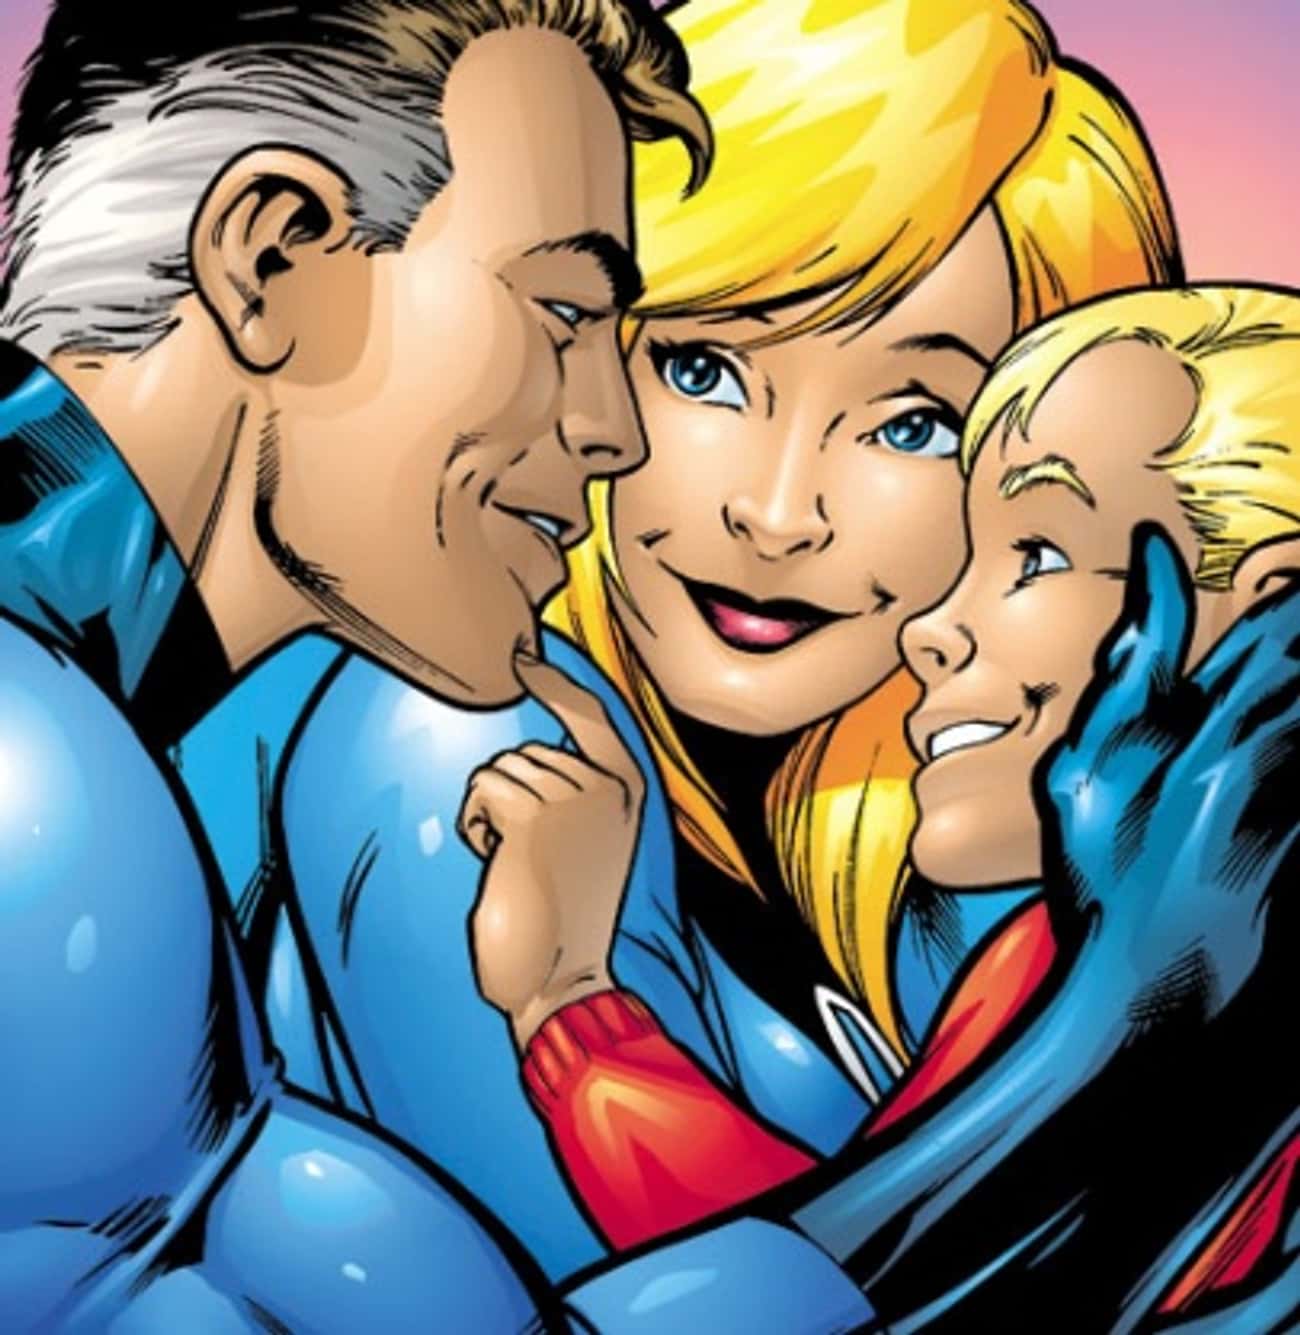 Reed Richards and Sue Storm